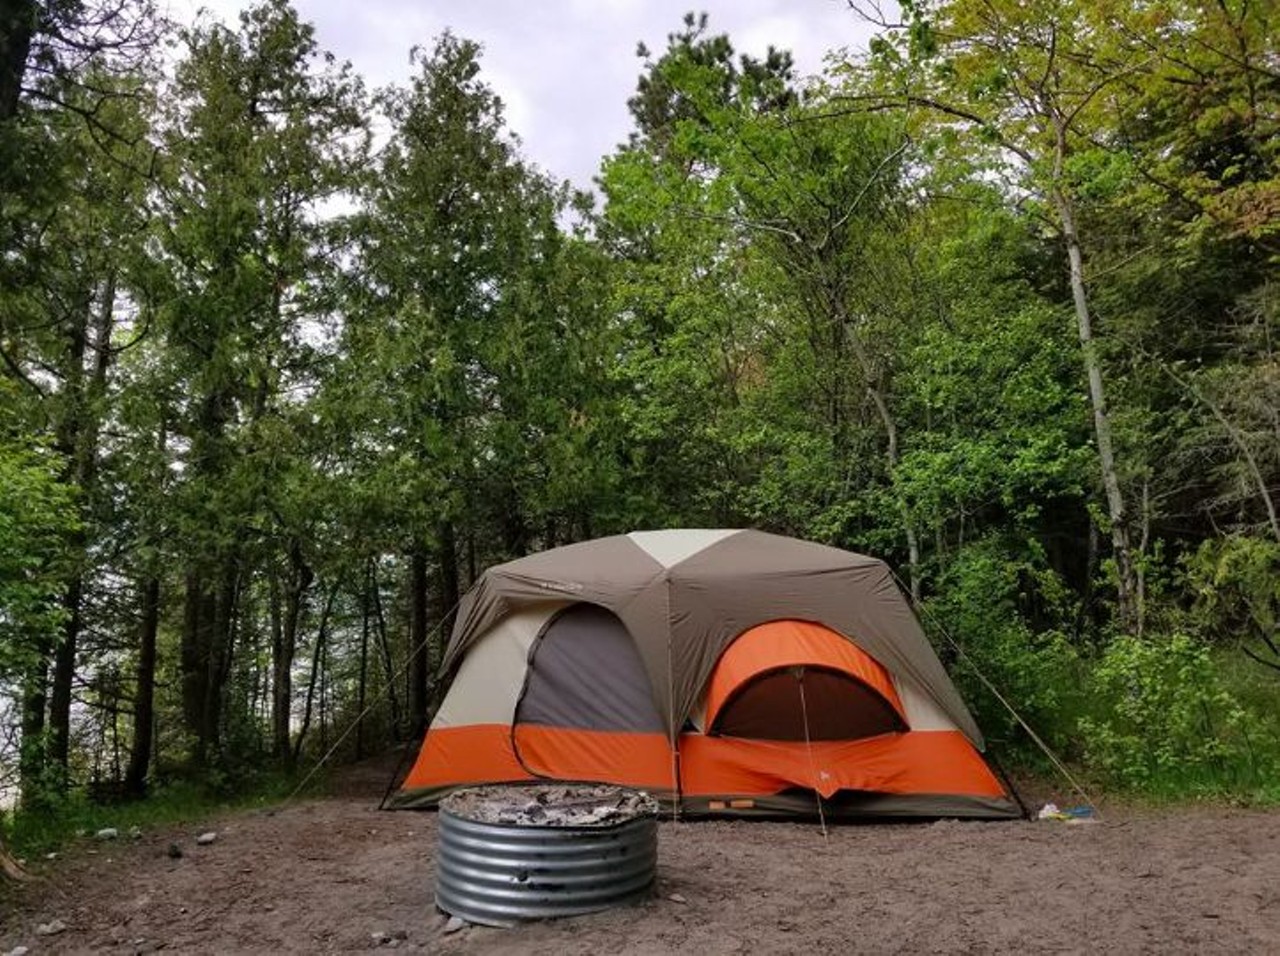 Fisherman&#146;s Island State Park
Charlevoix, MI
Another smaller campground on the west side of Michigan that is nothing short of amazing. It is set in the middle of the dunes and has abundance of hiking trails. This campground may not be right be steps away from the beach, but short walk you take to get there is worth it.  
Photo via Facebook user Rachael Cooper